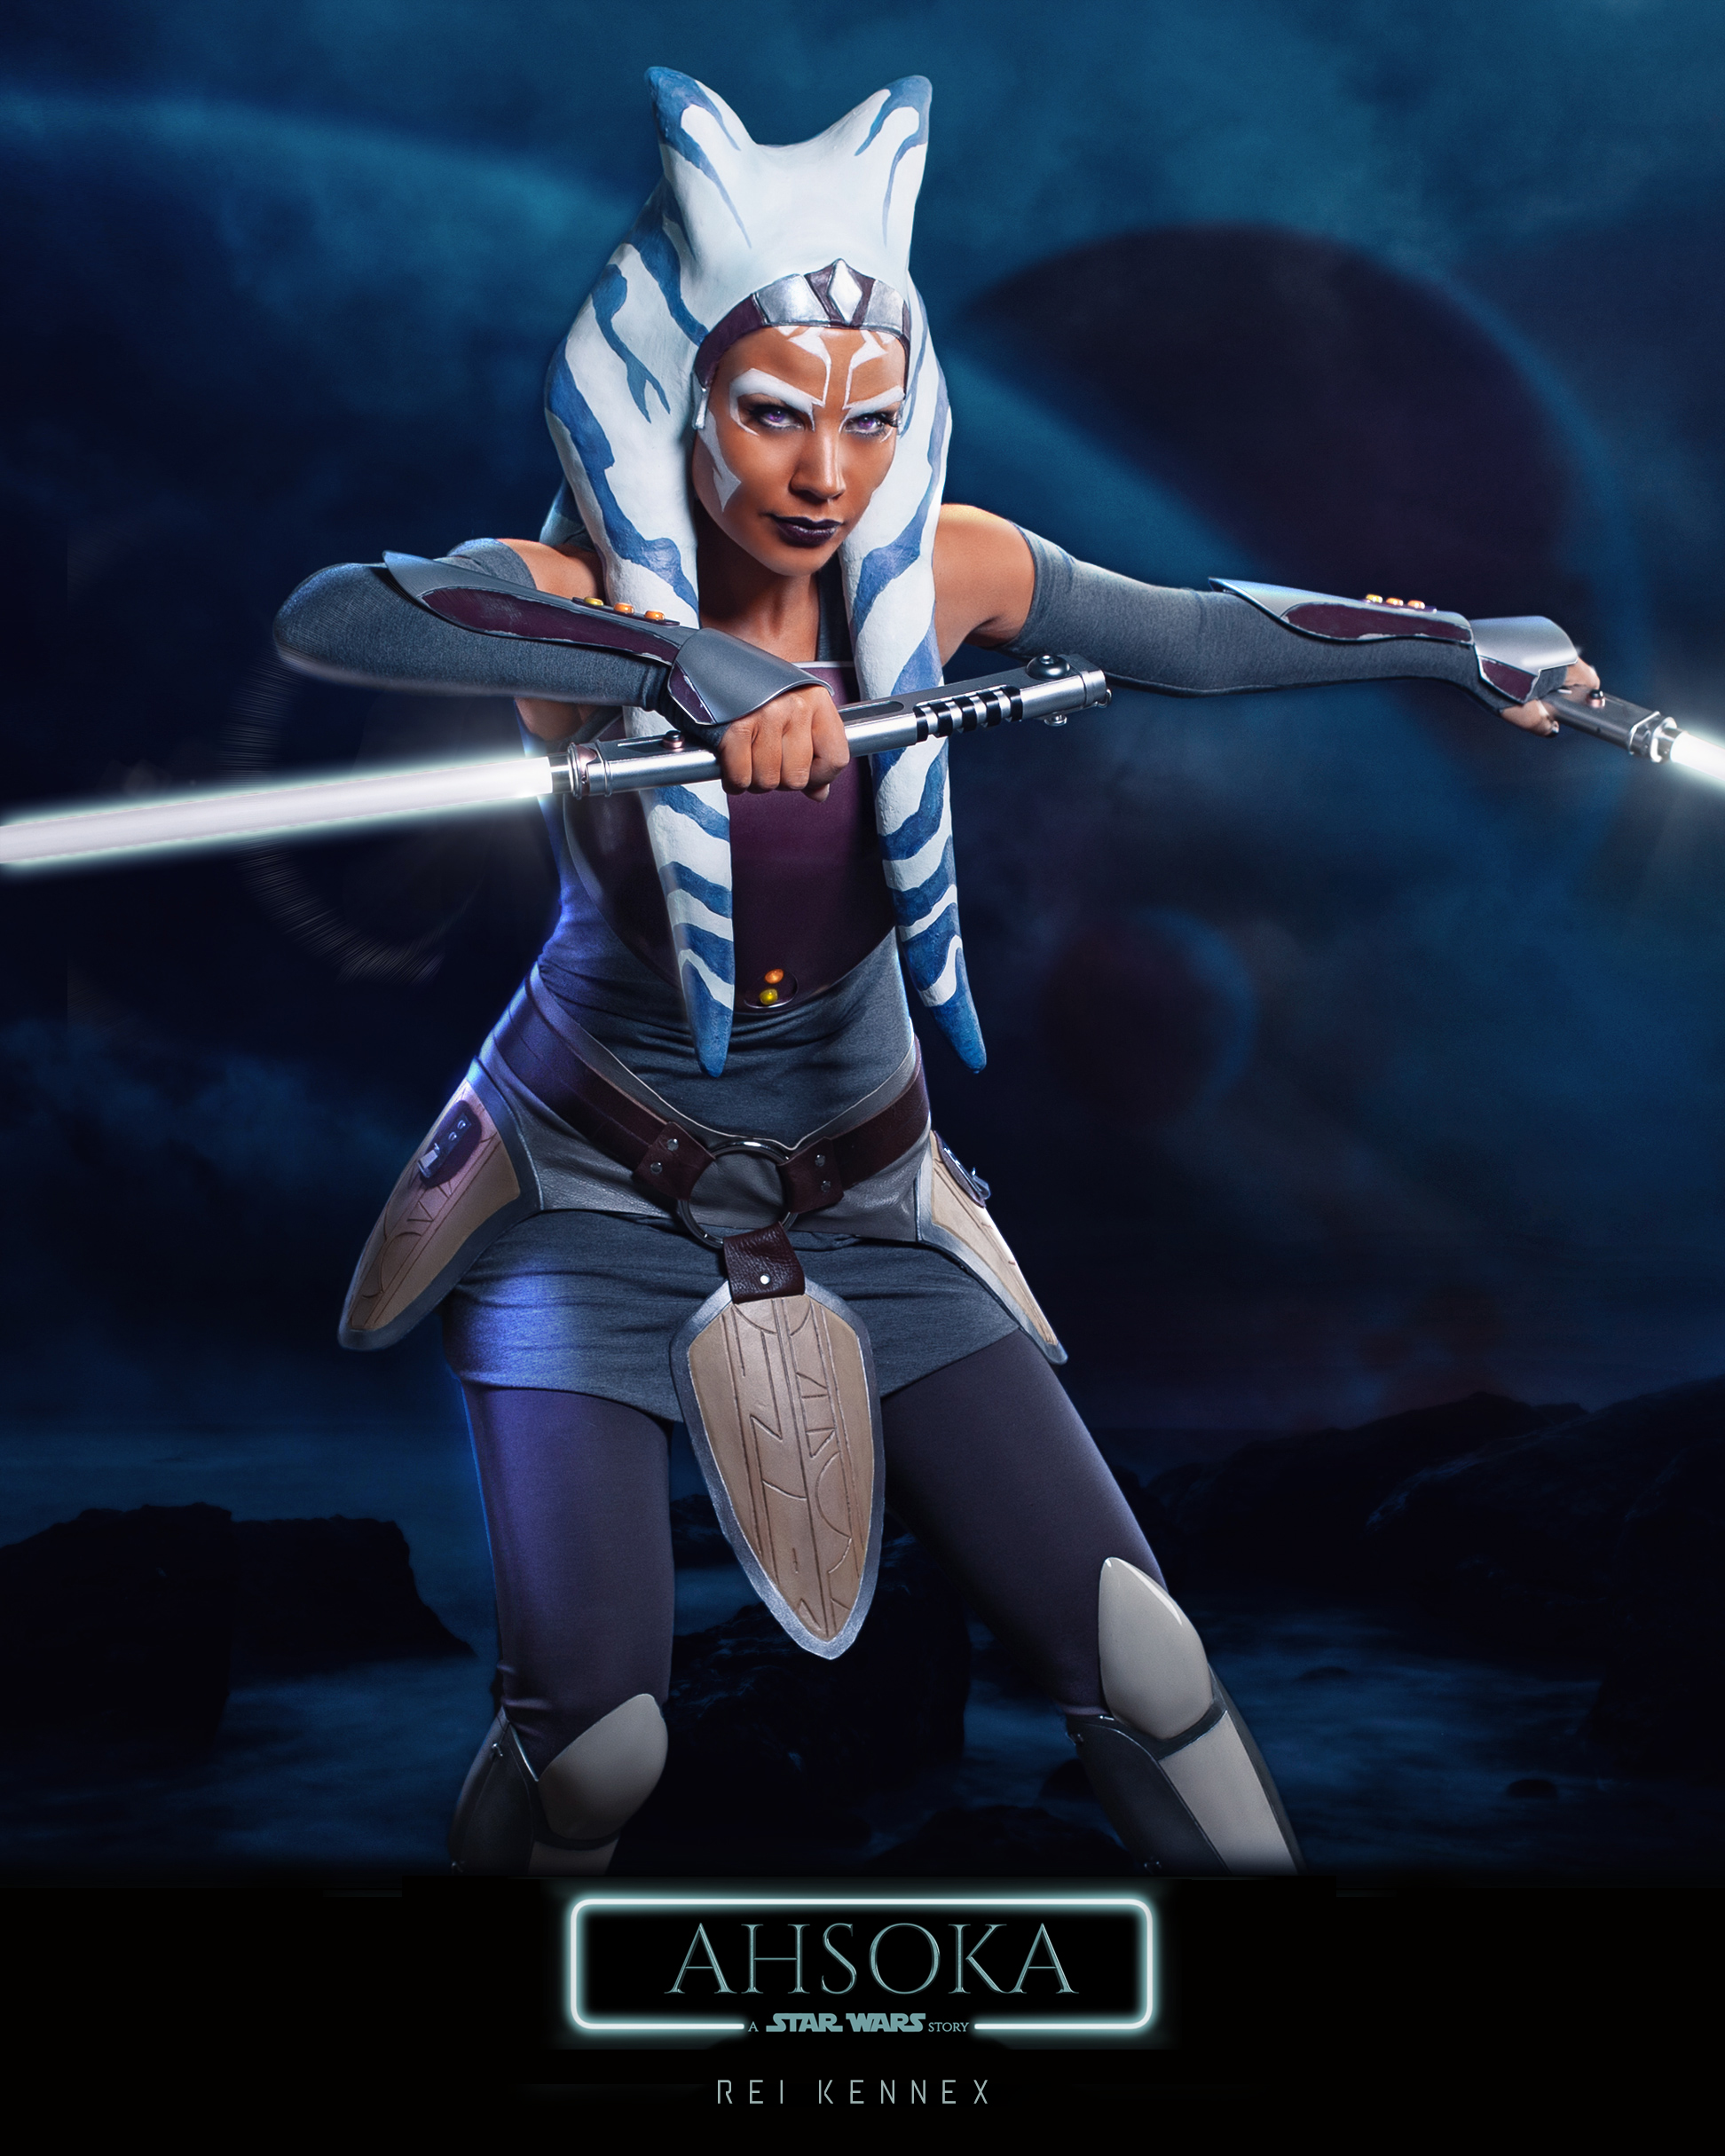 carol june recommends Pictures Of Ahsoka From Star Wars